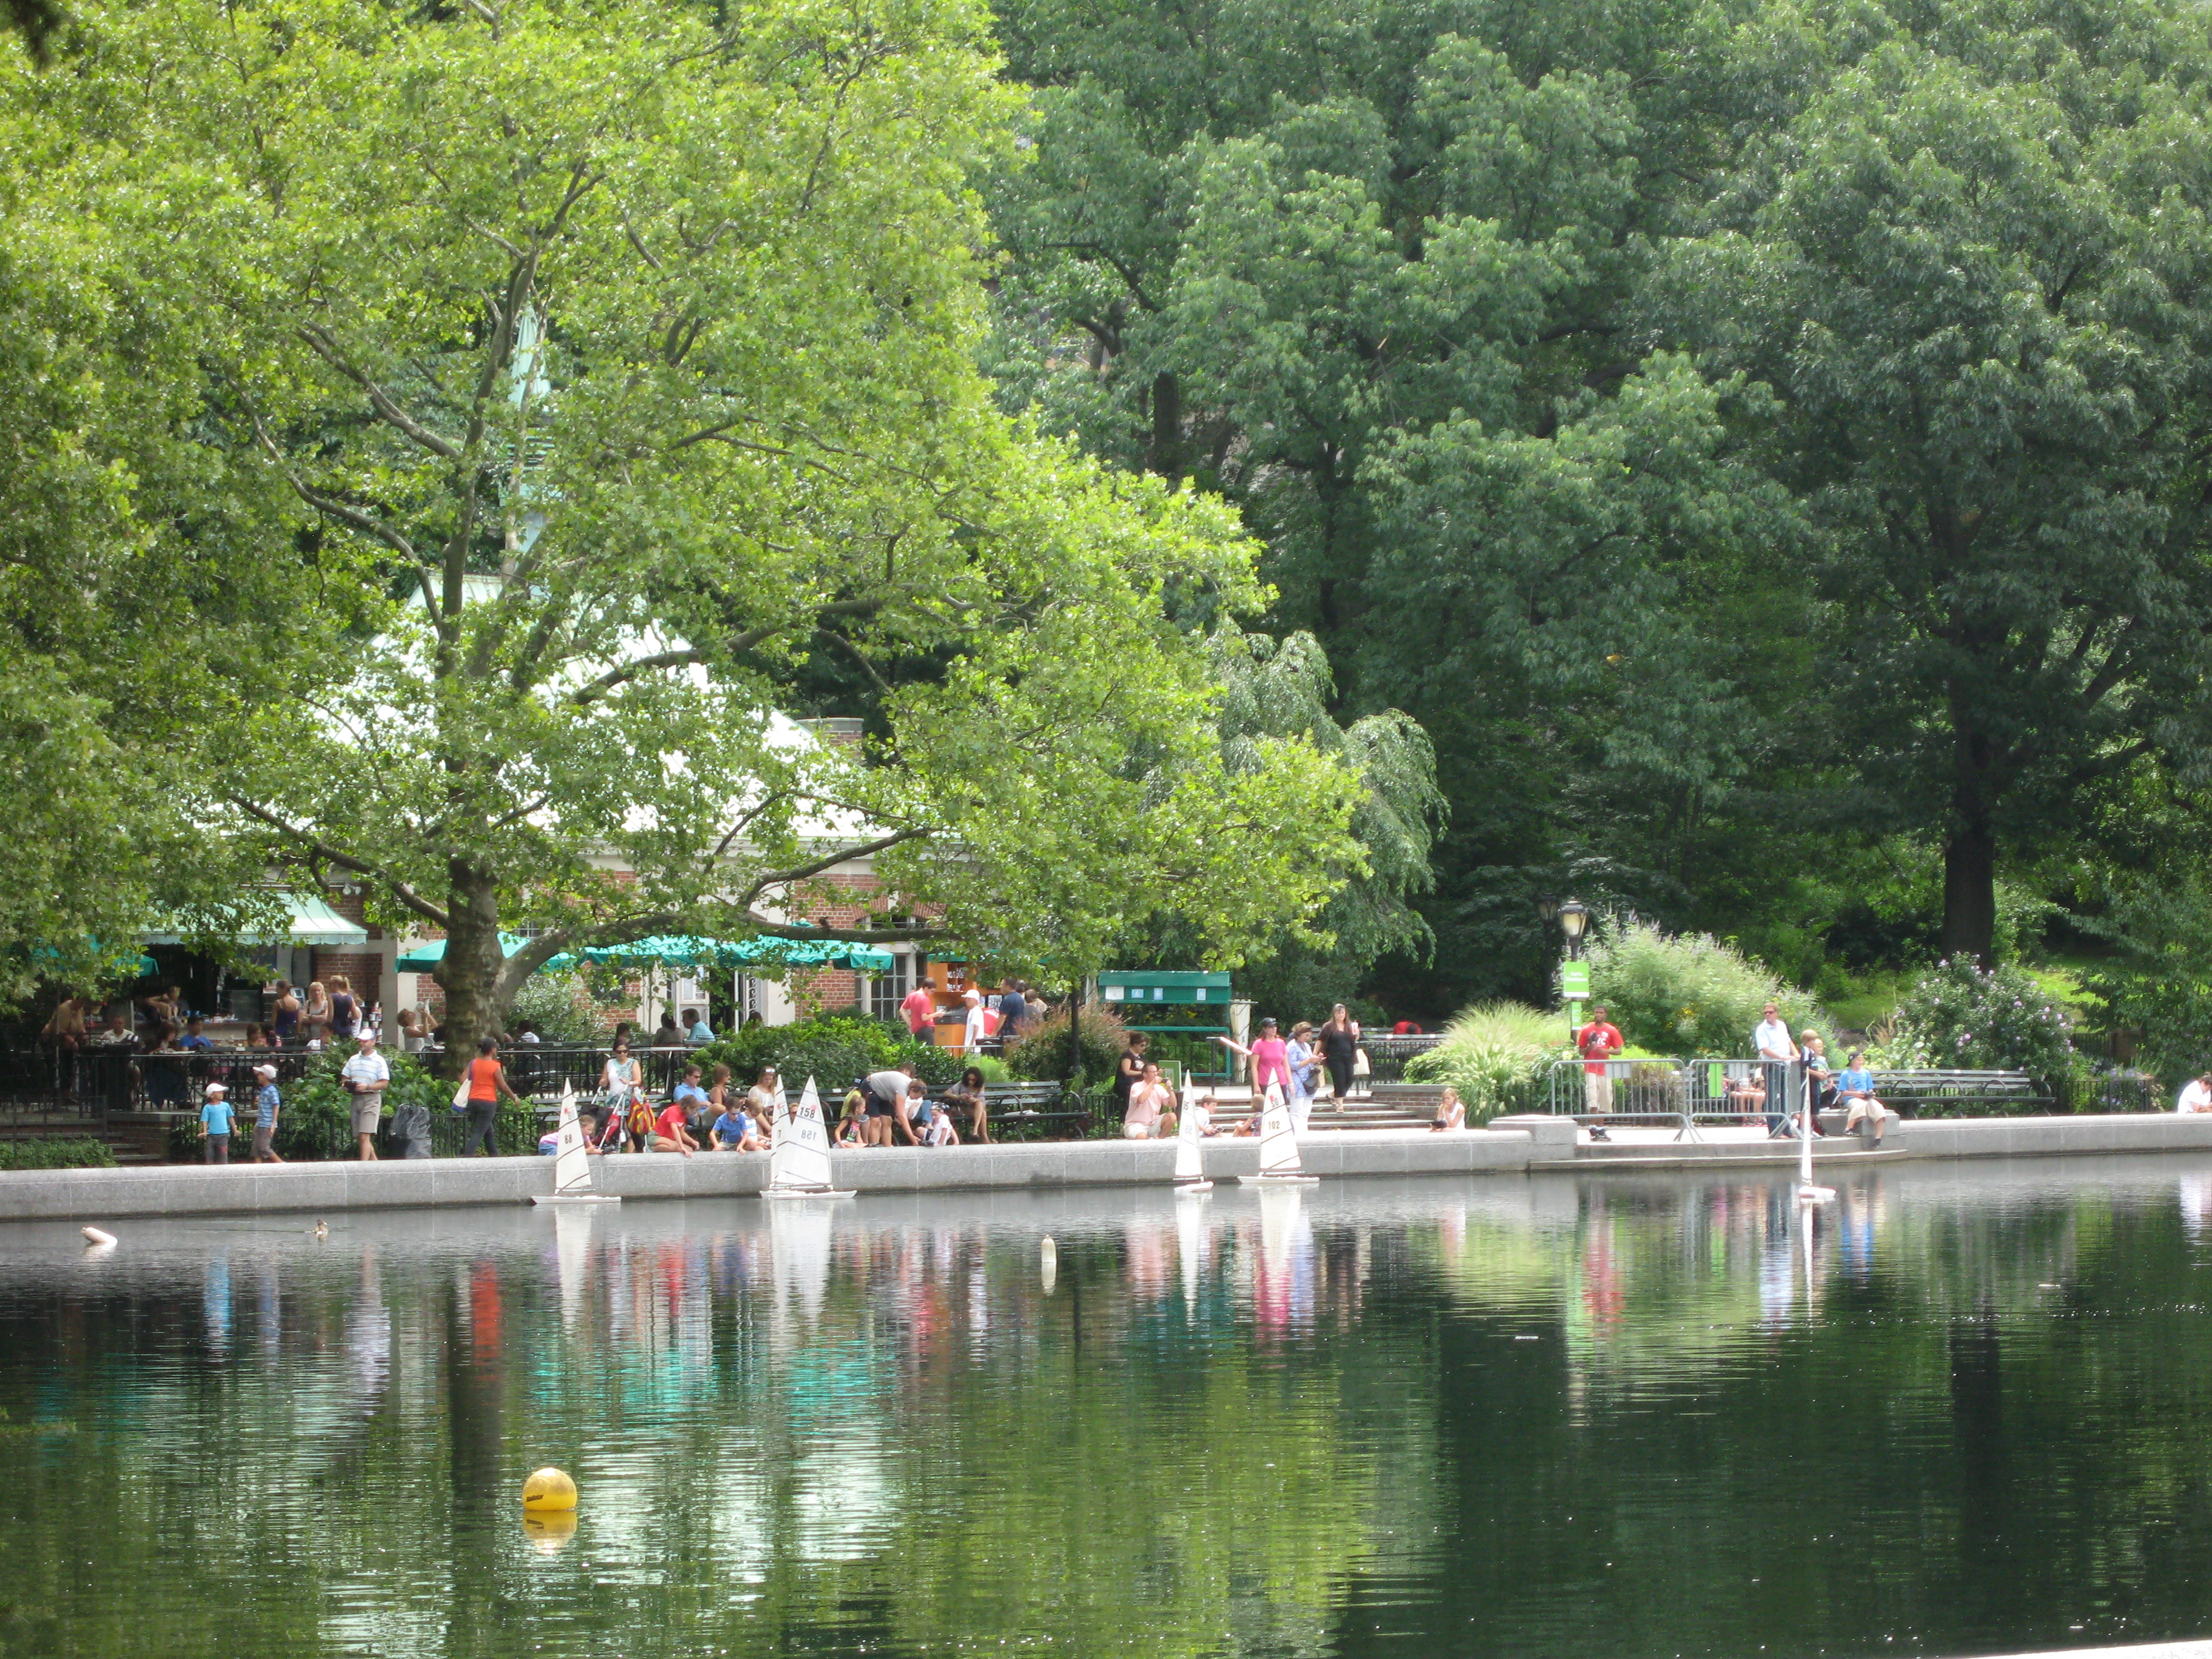 Sailing boats in Central Park